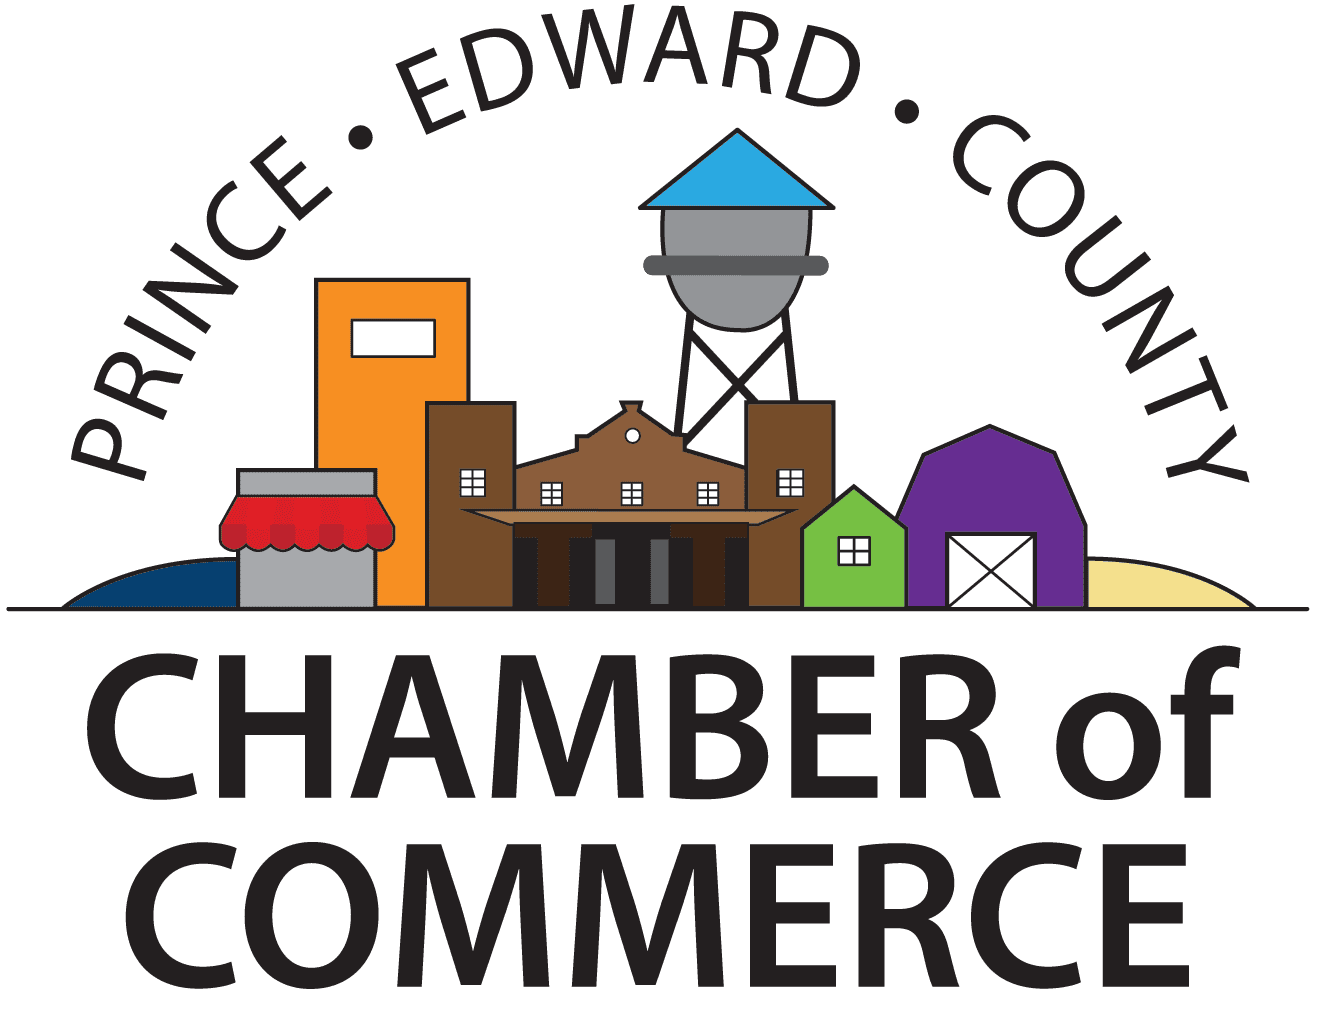 The Prince Edward County Chamber of Commerce Logo